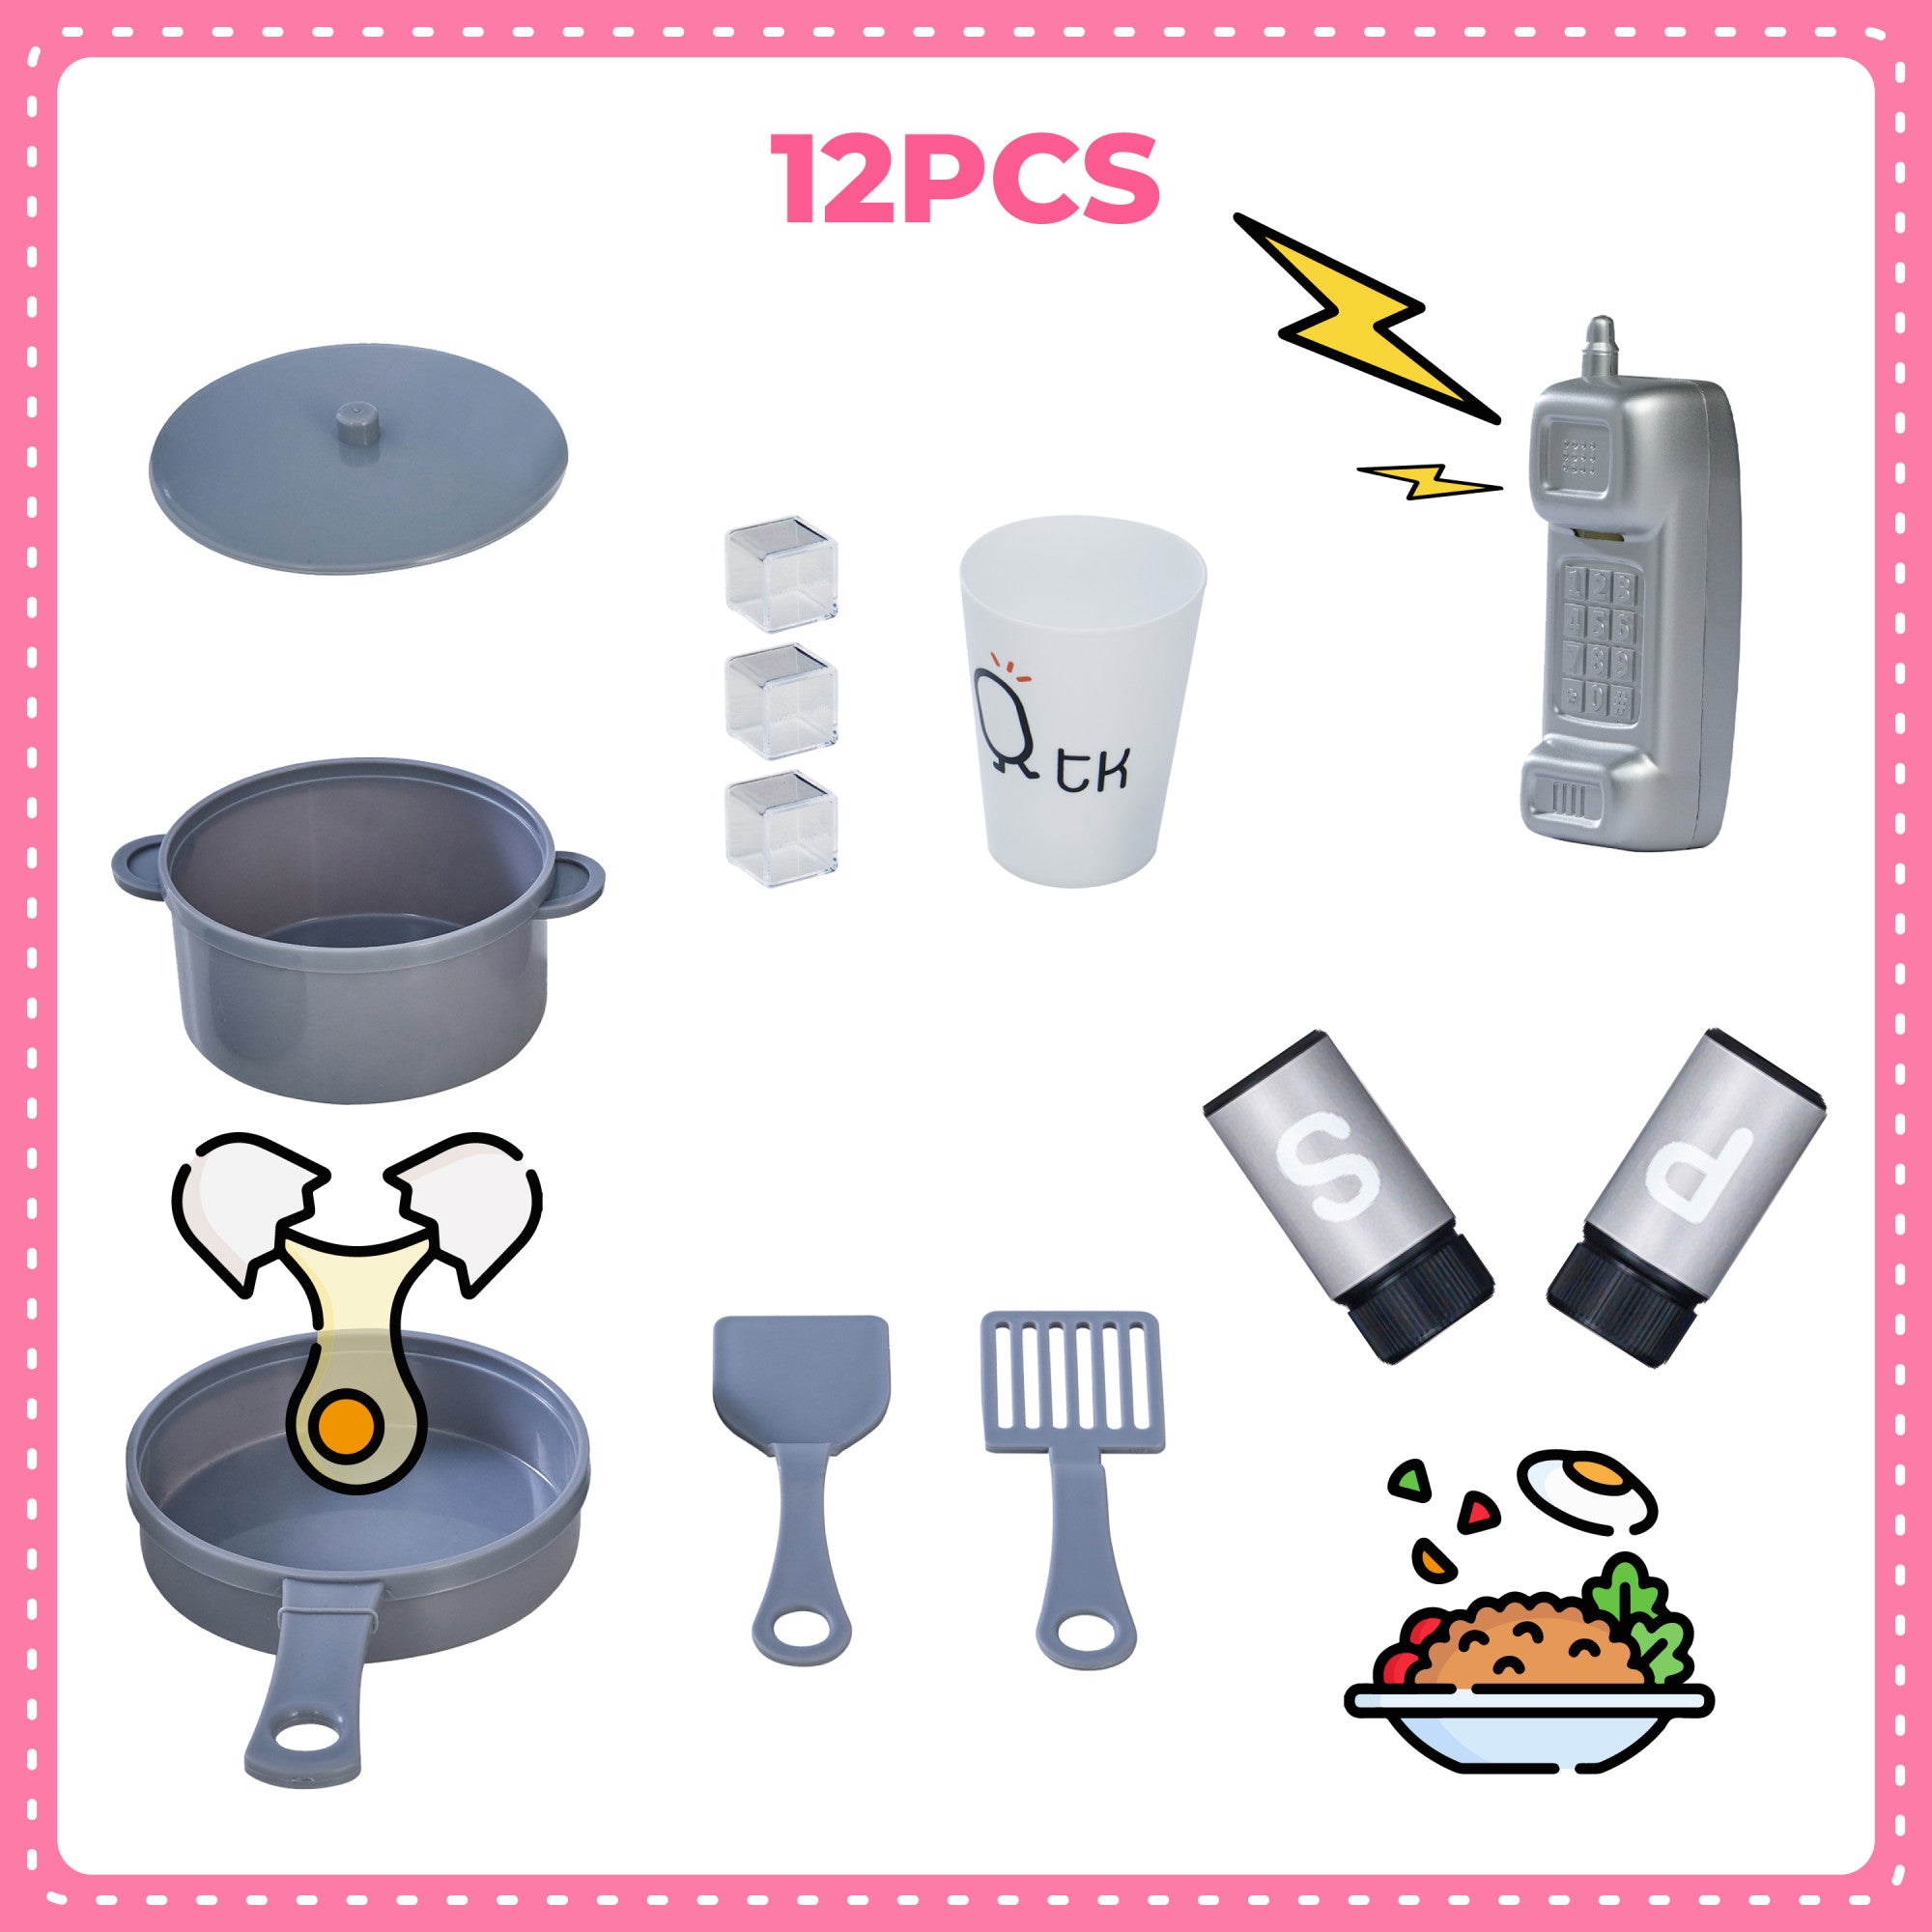 Teamson Kids Little Chef Mayfair Retro Play Kitchen with Accessories, Pink